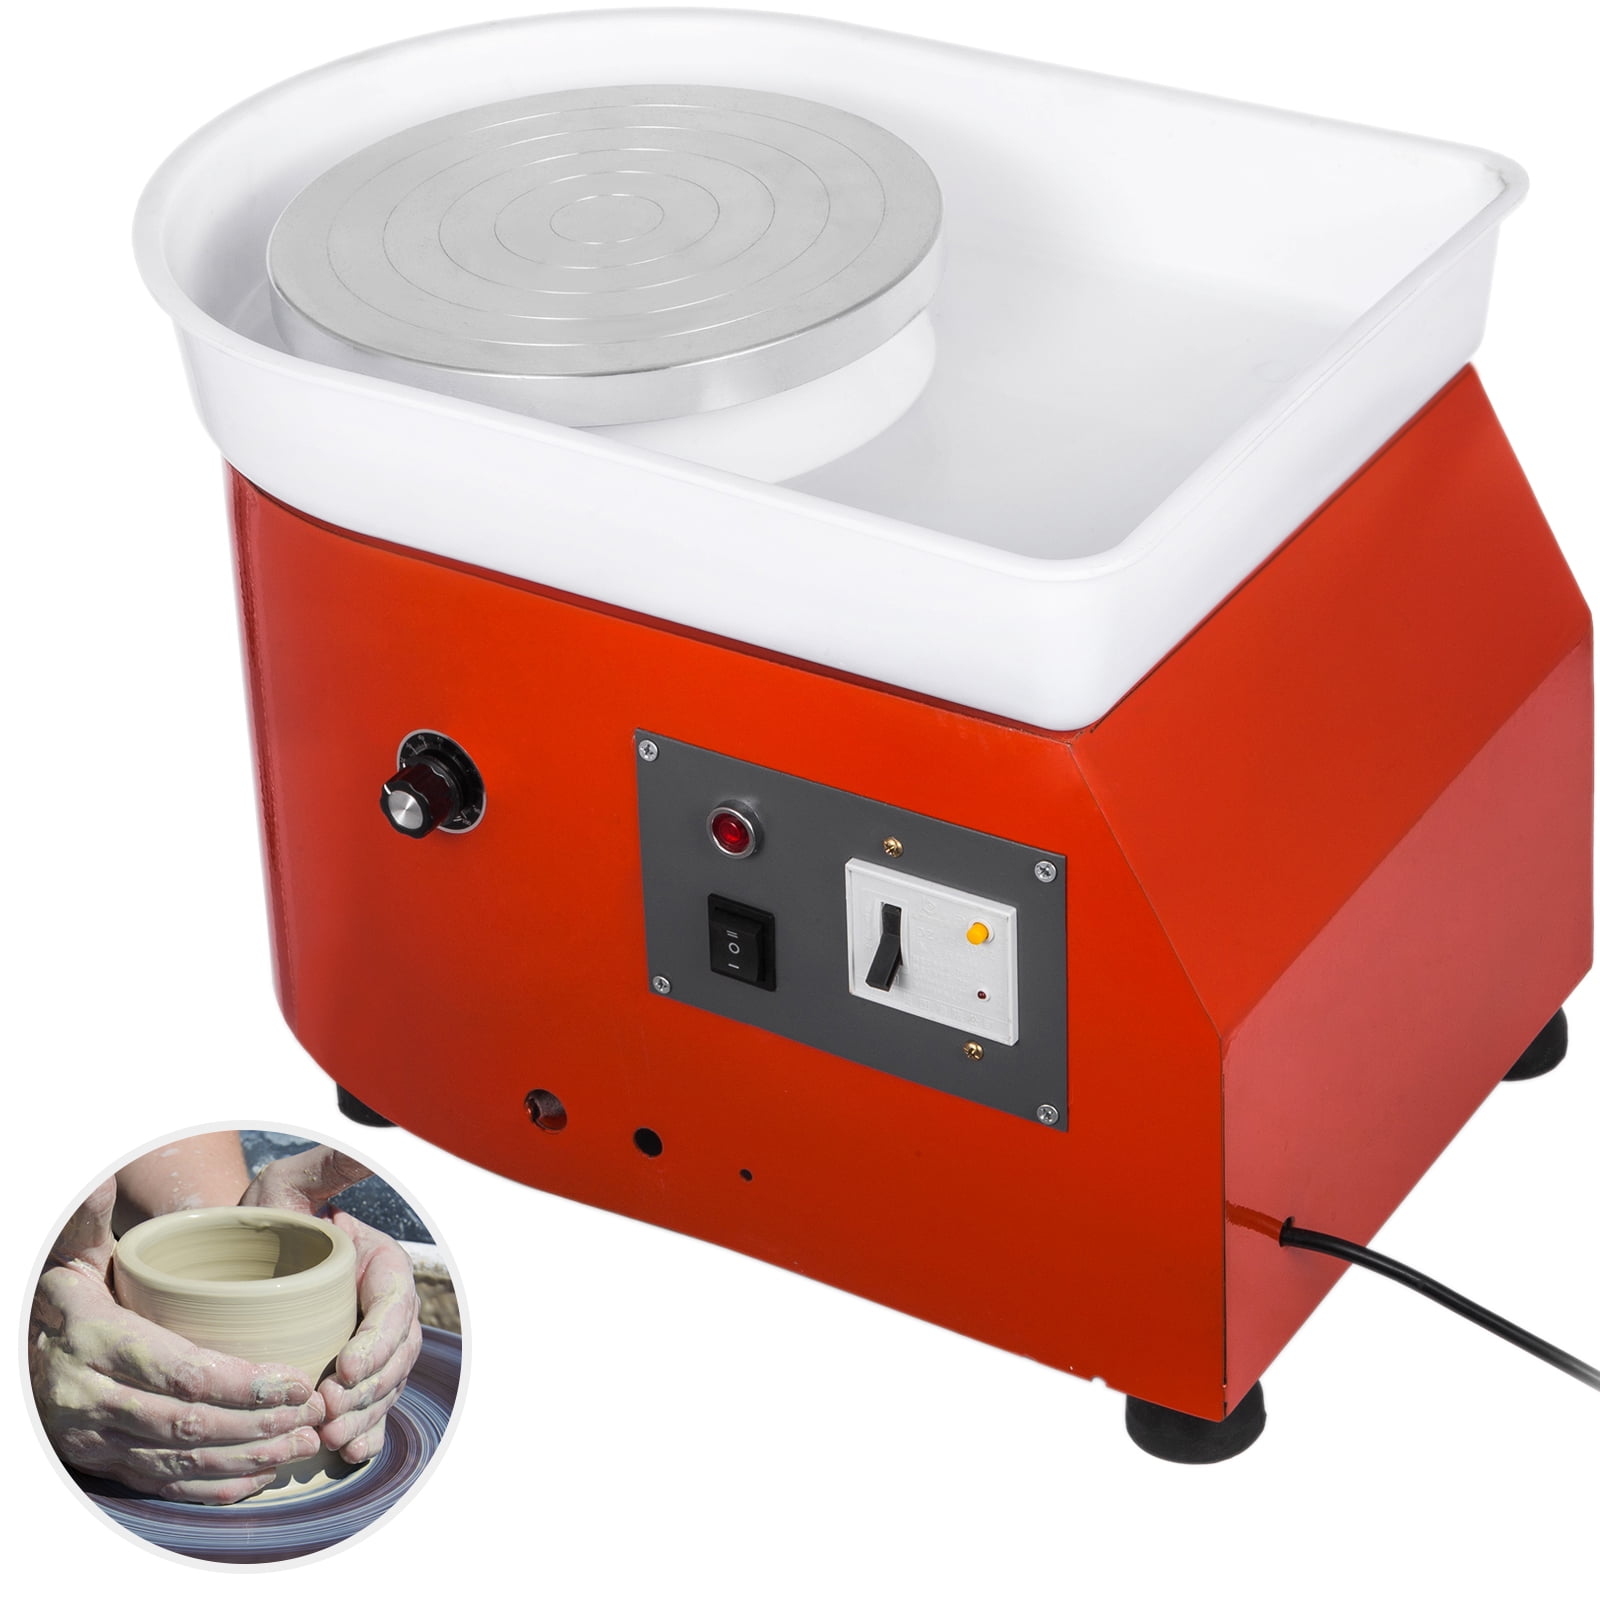 25CM 350W Electric Pottery Wheel Machine For Ceramic Work Clay Art Craft Molding 